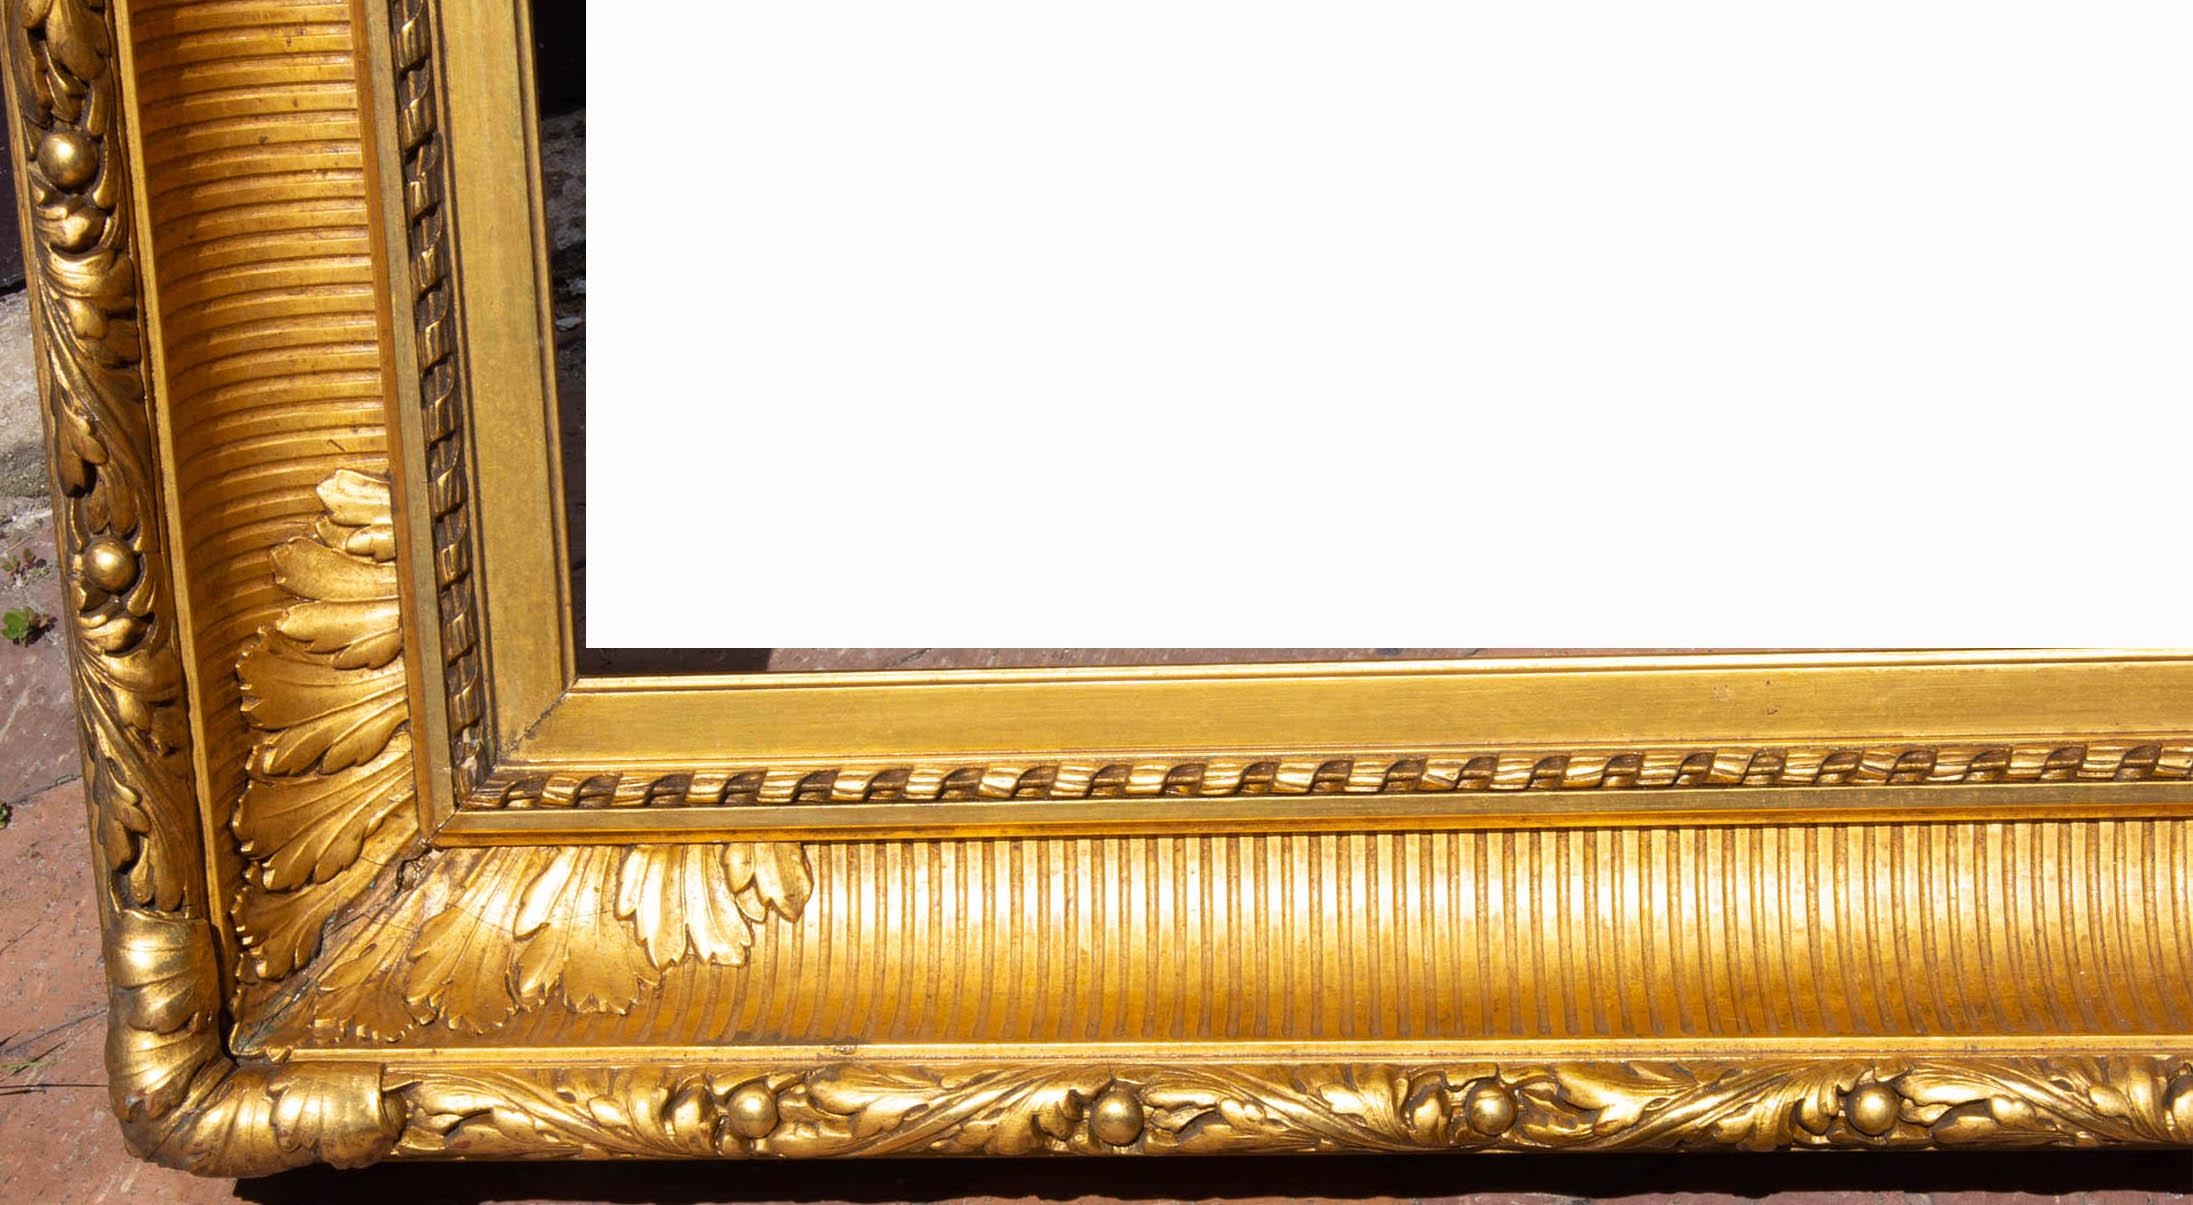 Large American 19th century gilt fluted cove frame, circa 1860s. Will hold a 36